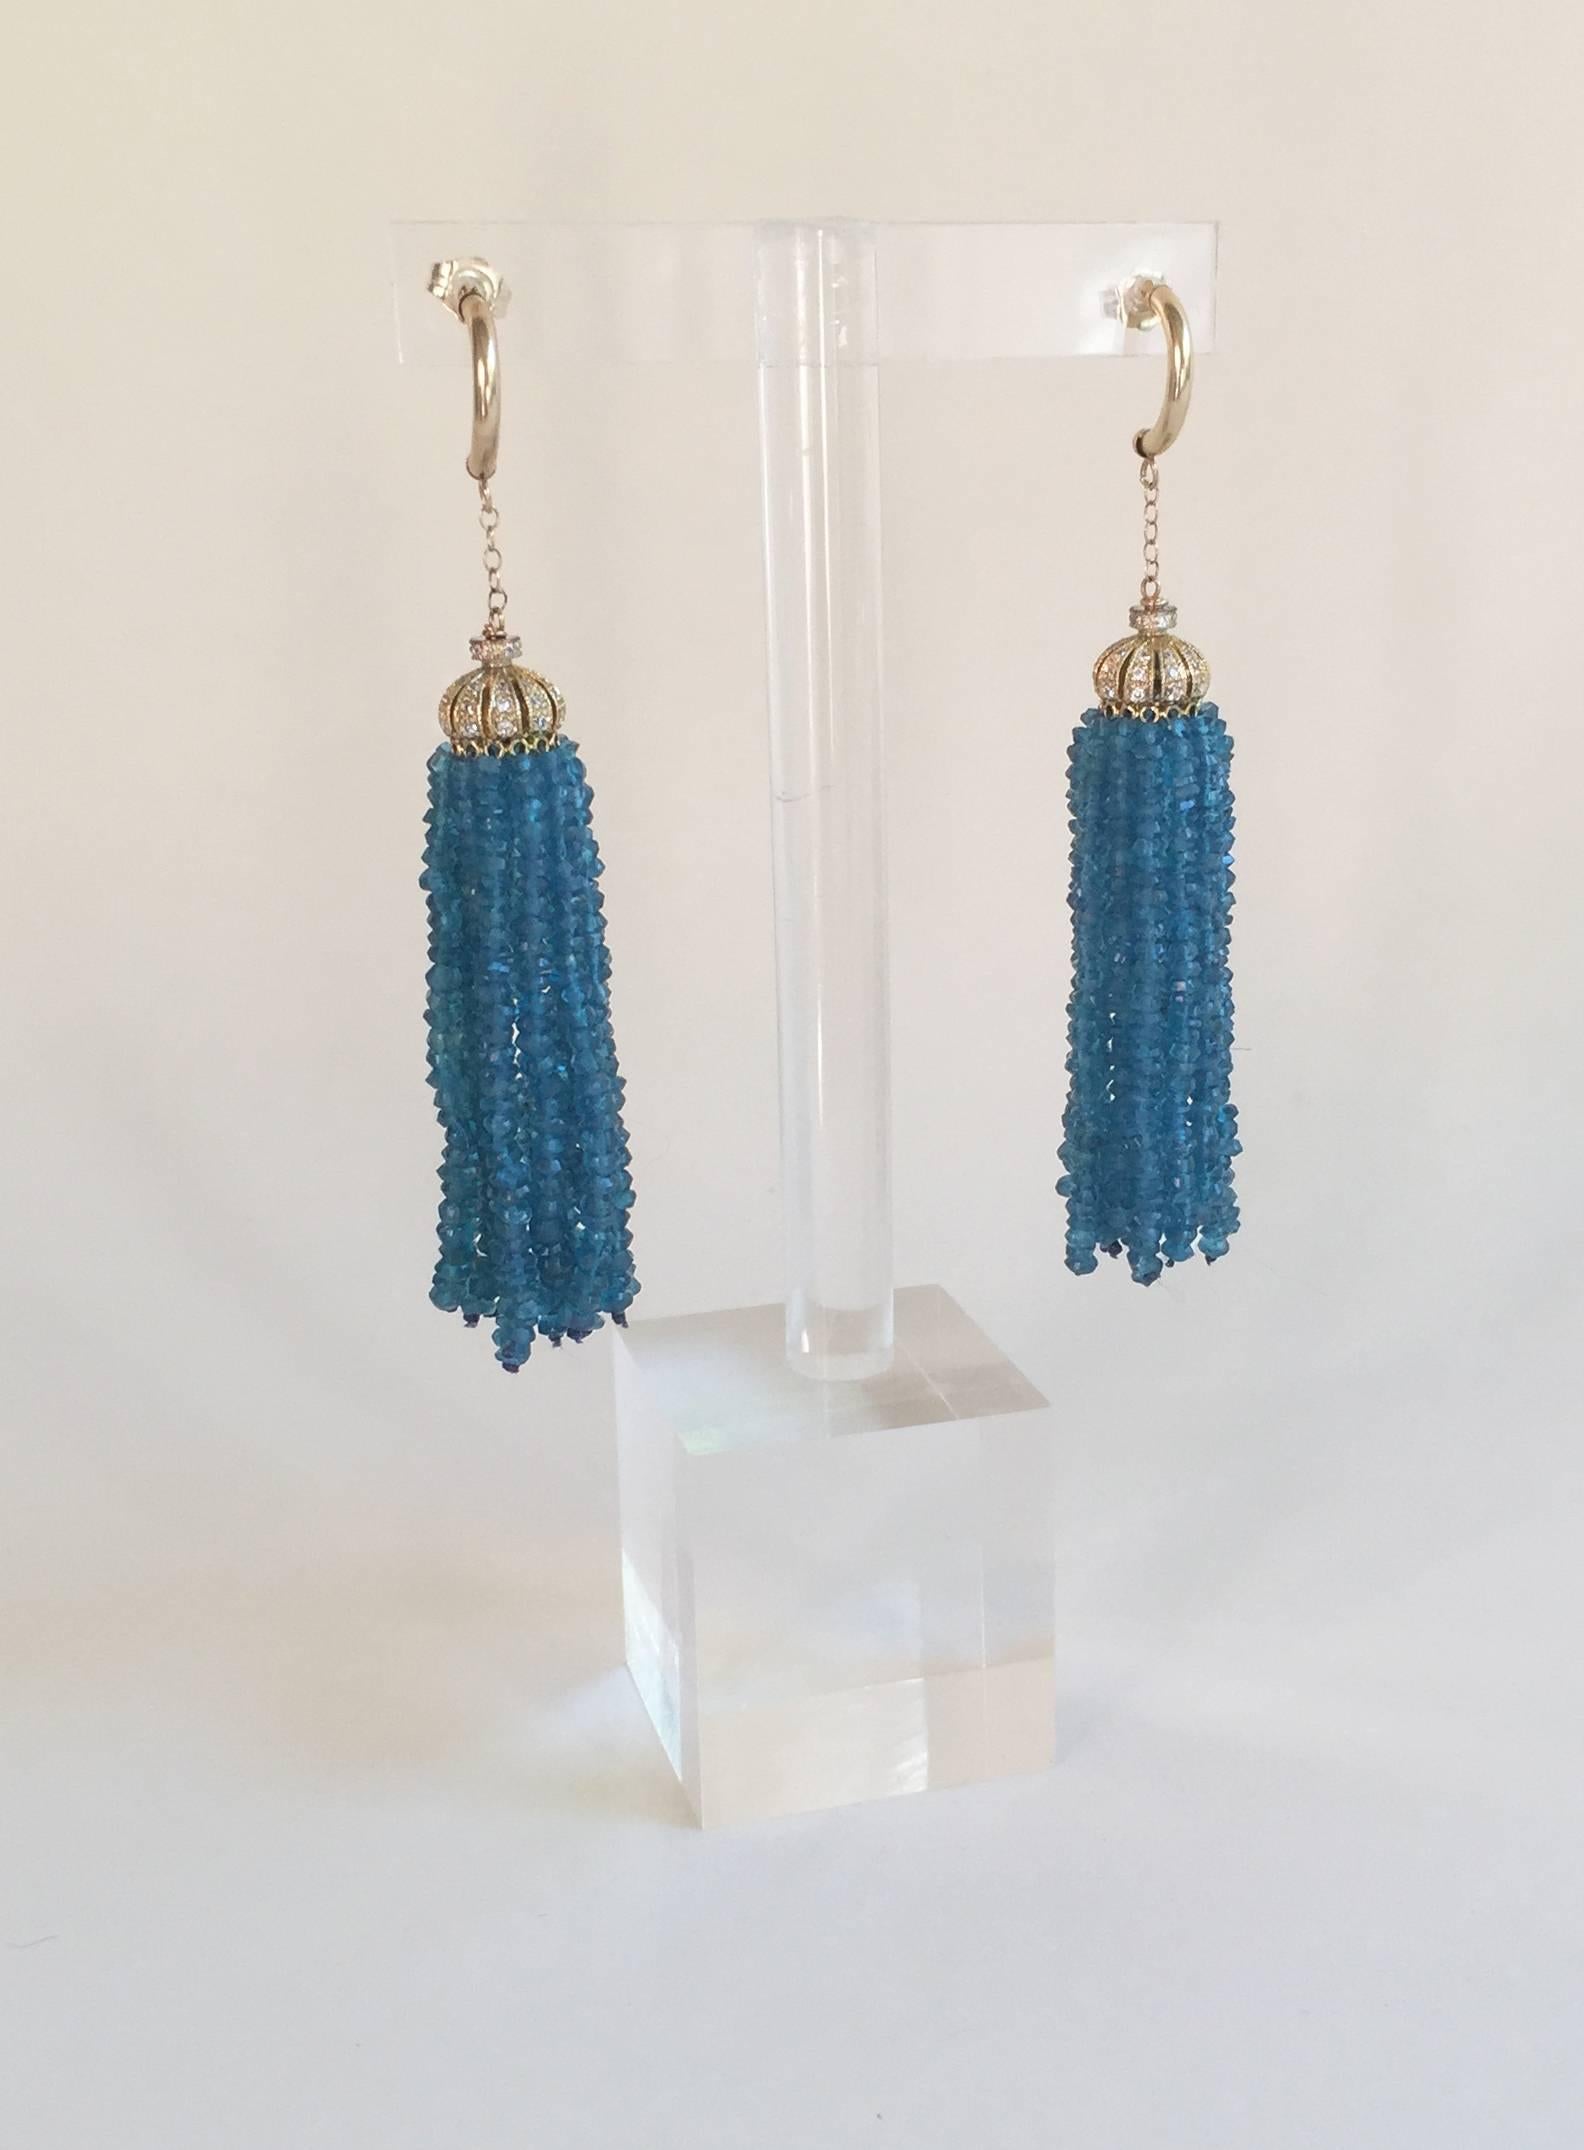 These vibrant blue London Blue Topaz tassel earrings elegantly frame the face and dance with the your movements. The earrings are crowned with Silver-Gold Plate and Diamond encrusted cups, completed with 14k yellow finishing. These earrings hang at